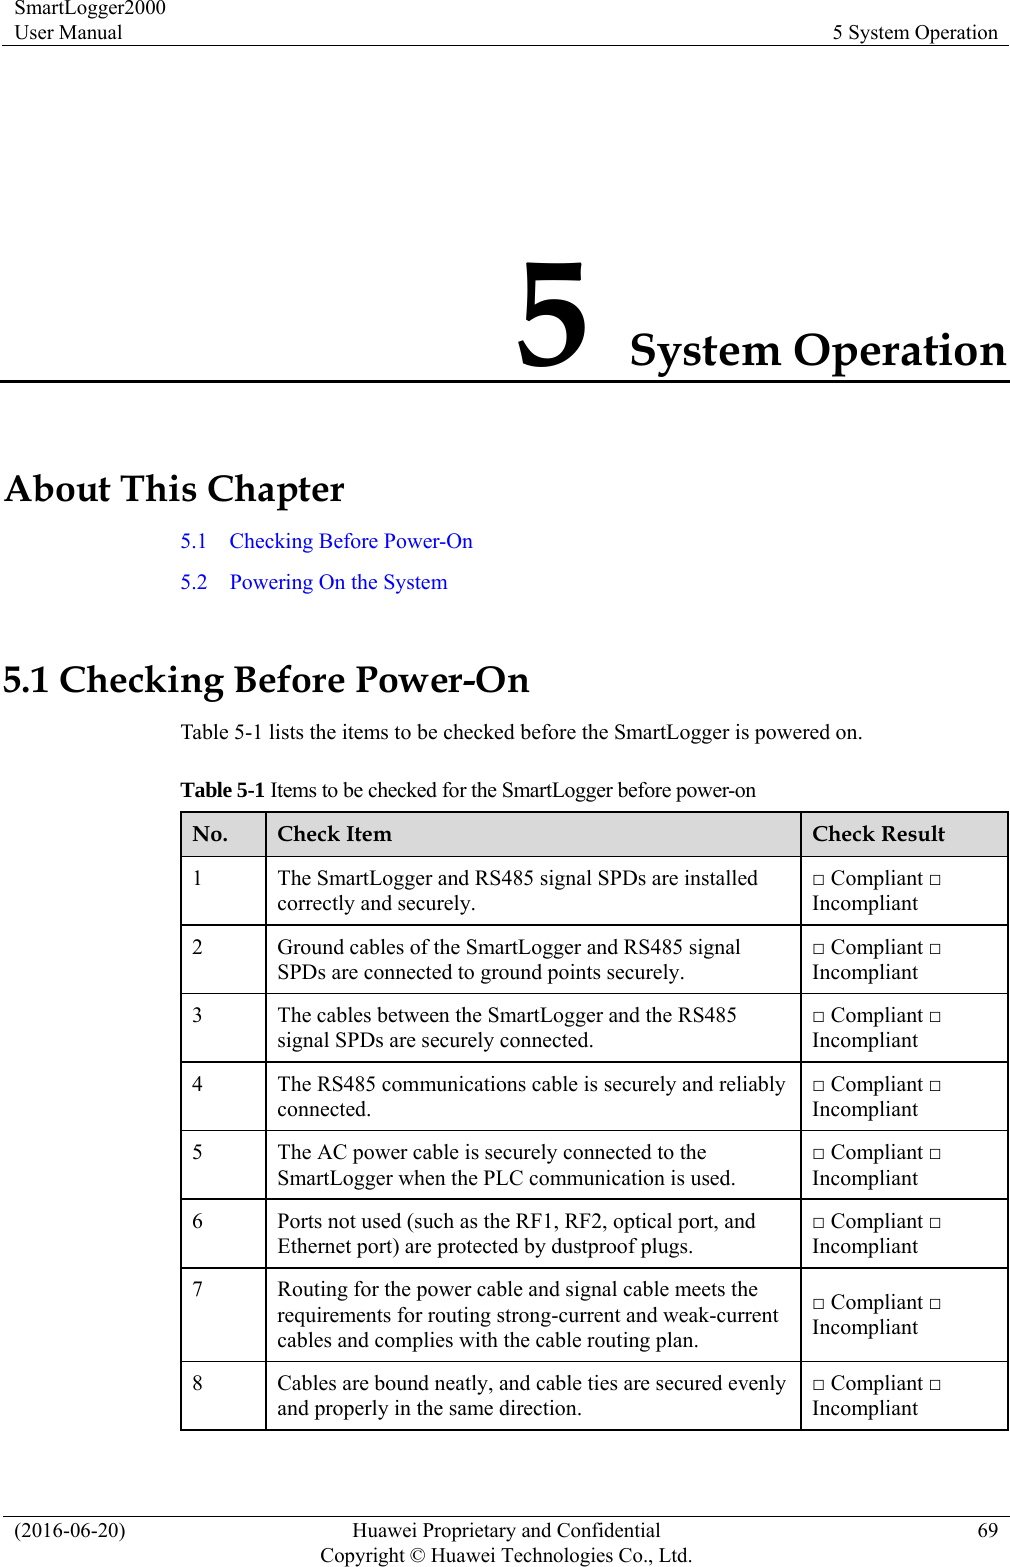 SmartLogger2000 User Manual  5 System Operation (2016-06-20)  Huawei Proprietary and Confidential         Copyright © Huawei Technologies Co., Ltd.69 5 System Operation About This Chapter 5.1    Checking Before Power-On 5.2  Powering On the System 5.1 Checking Before Power-On Table 5-1 lists the items to be checked before the SmartLogger is powered on.   Table 5-1 Items to be checked for the SmartLogger before power-on No.  Check Item  Check Result 1  The SmartLogger and RS485 signal SPDs are installed correctly and securely. □ Compliant □ Incompliant 2  Ground cables of the SmartLogger and RS485 signal SPDs are connected to ground points securely. □ Compliant □ Incompliant 3  The cables between the SmartLogger and the RS485 signal SPDs are securely connected.   □ Compliant □ Incompliant 4  The RS485 communications cable is securely and reliably connected. □ Compliant □ Incompliant 5  The AC power cable is securely connected to the SmartLogger when the PLC communication is used.   □ Compliant □ Incompliant 6  Ports not used (such as the RF1, RF2, optical port, and Ethernet port) are protected by dustproof plugs.   □ Compliant □ Incompliant 7  Routing for the power cable and signal cable meets the requirements for routing strong-current and weak-current cables and complies with the cable routing plan.   □ Compliant □ Incompliant 8  Cables are bound neatly, and cable ties are secured evenly and properly in the same direction. □ Compliant □ Incompliant 